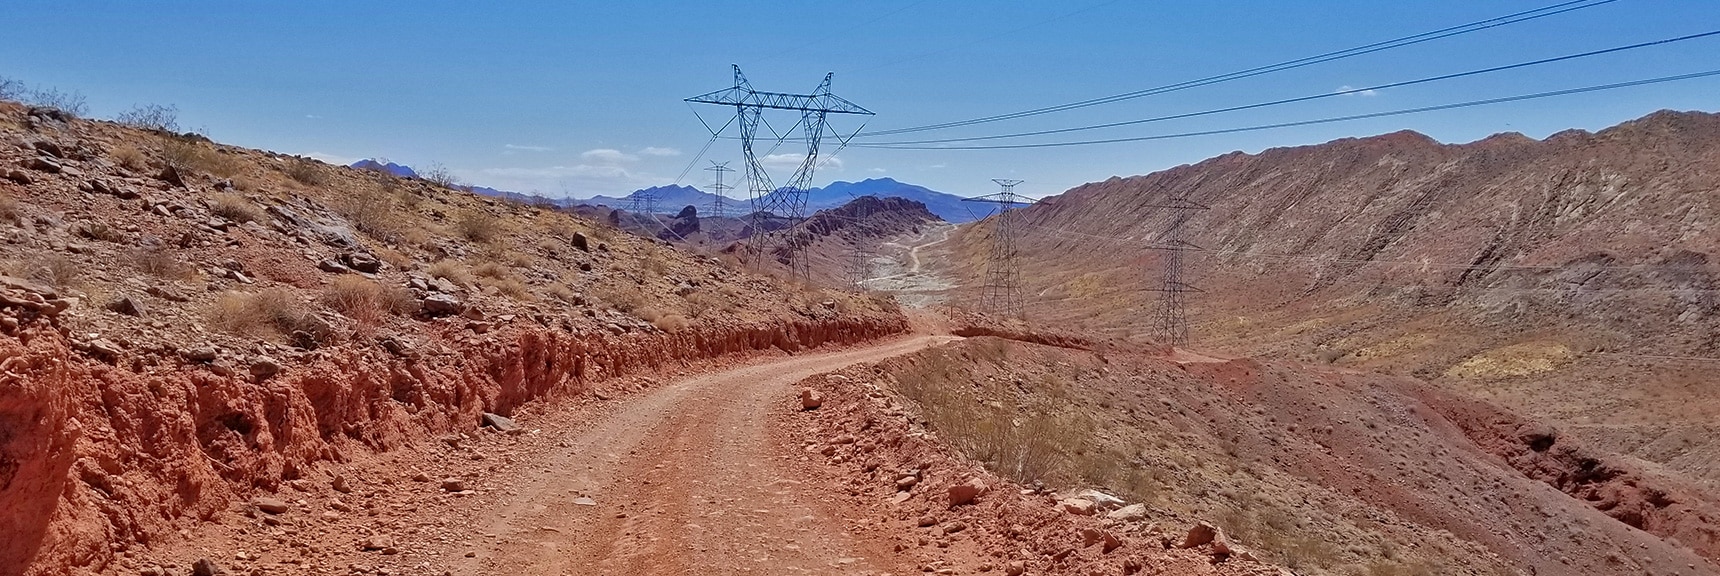 View Back South on Lava Butte Road | Lava Butte | Lake Mead National Recreation Area, Nevada